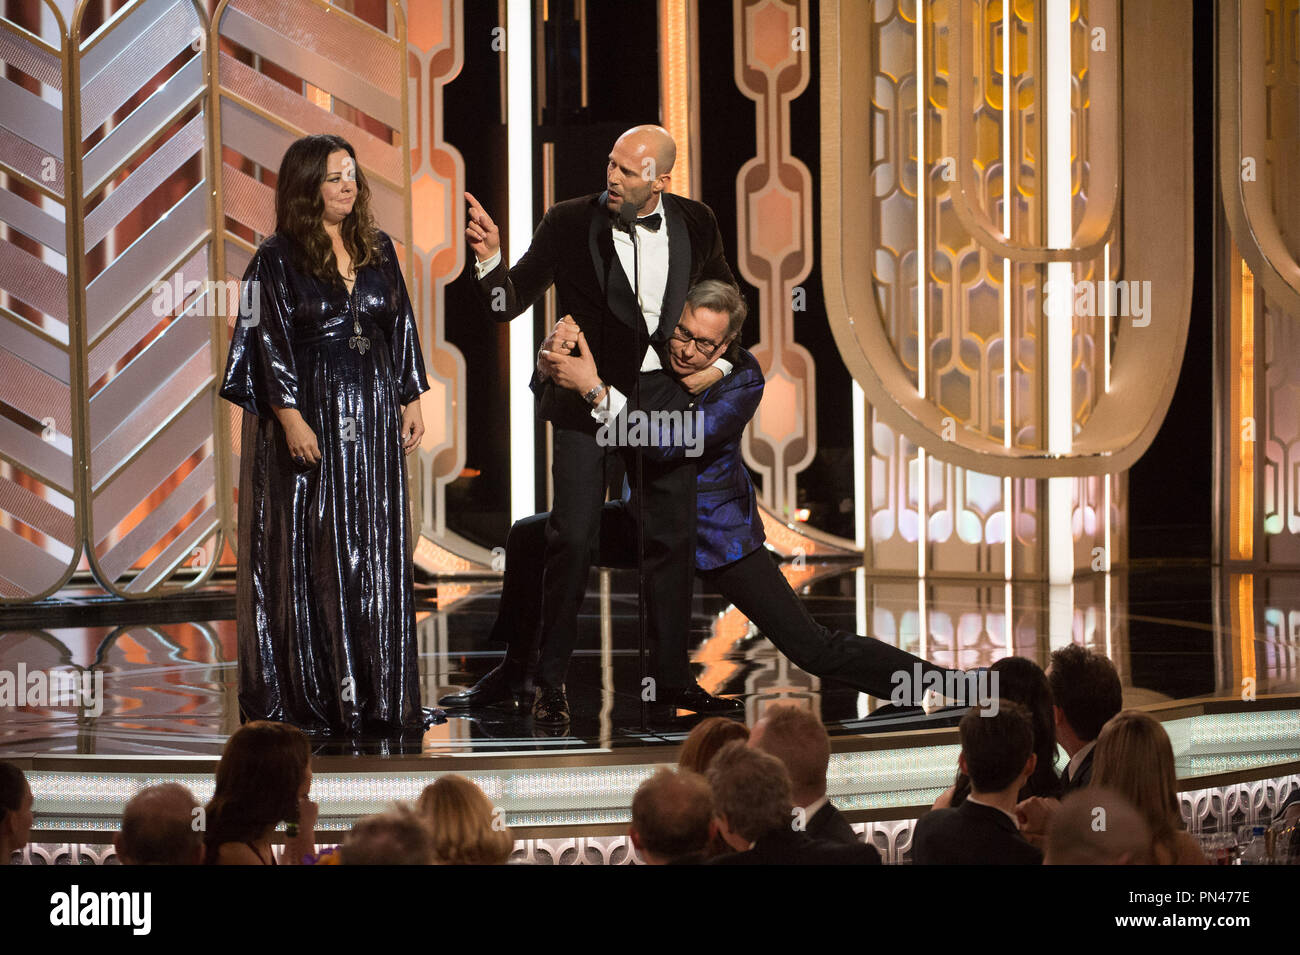 Presenters Melissa McCarthy, Jason Statham, and Paul Feig onstage at the 73rd Annual Golden Globe Awards at the Beverly Hilton in Beverly Hills, CA on Sunday, January 10, 2016. Stock Photo